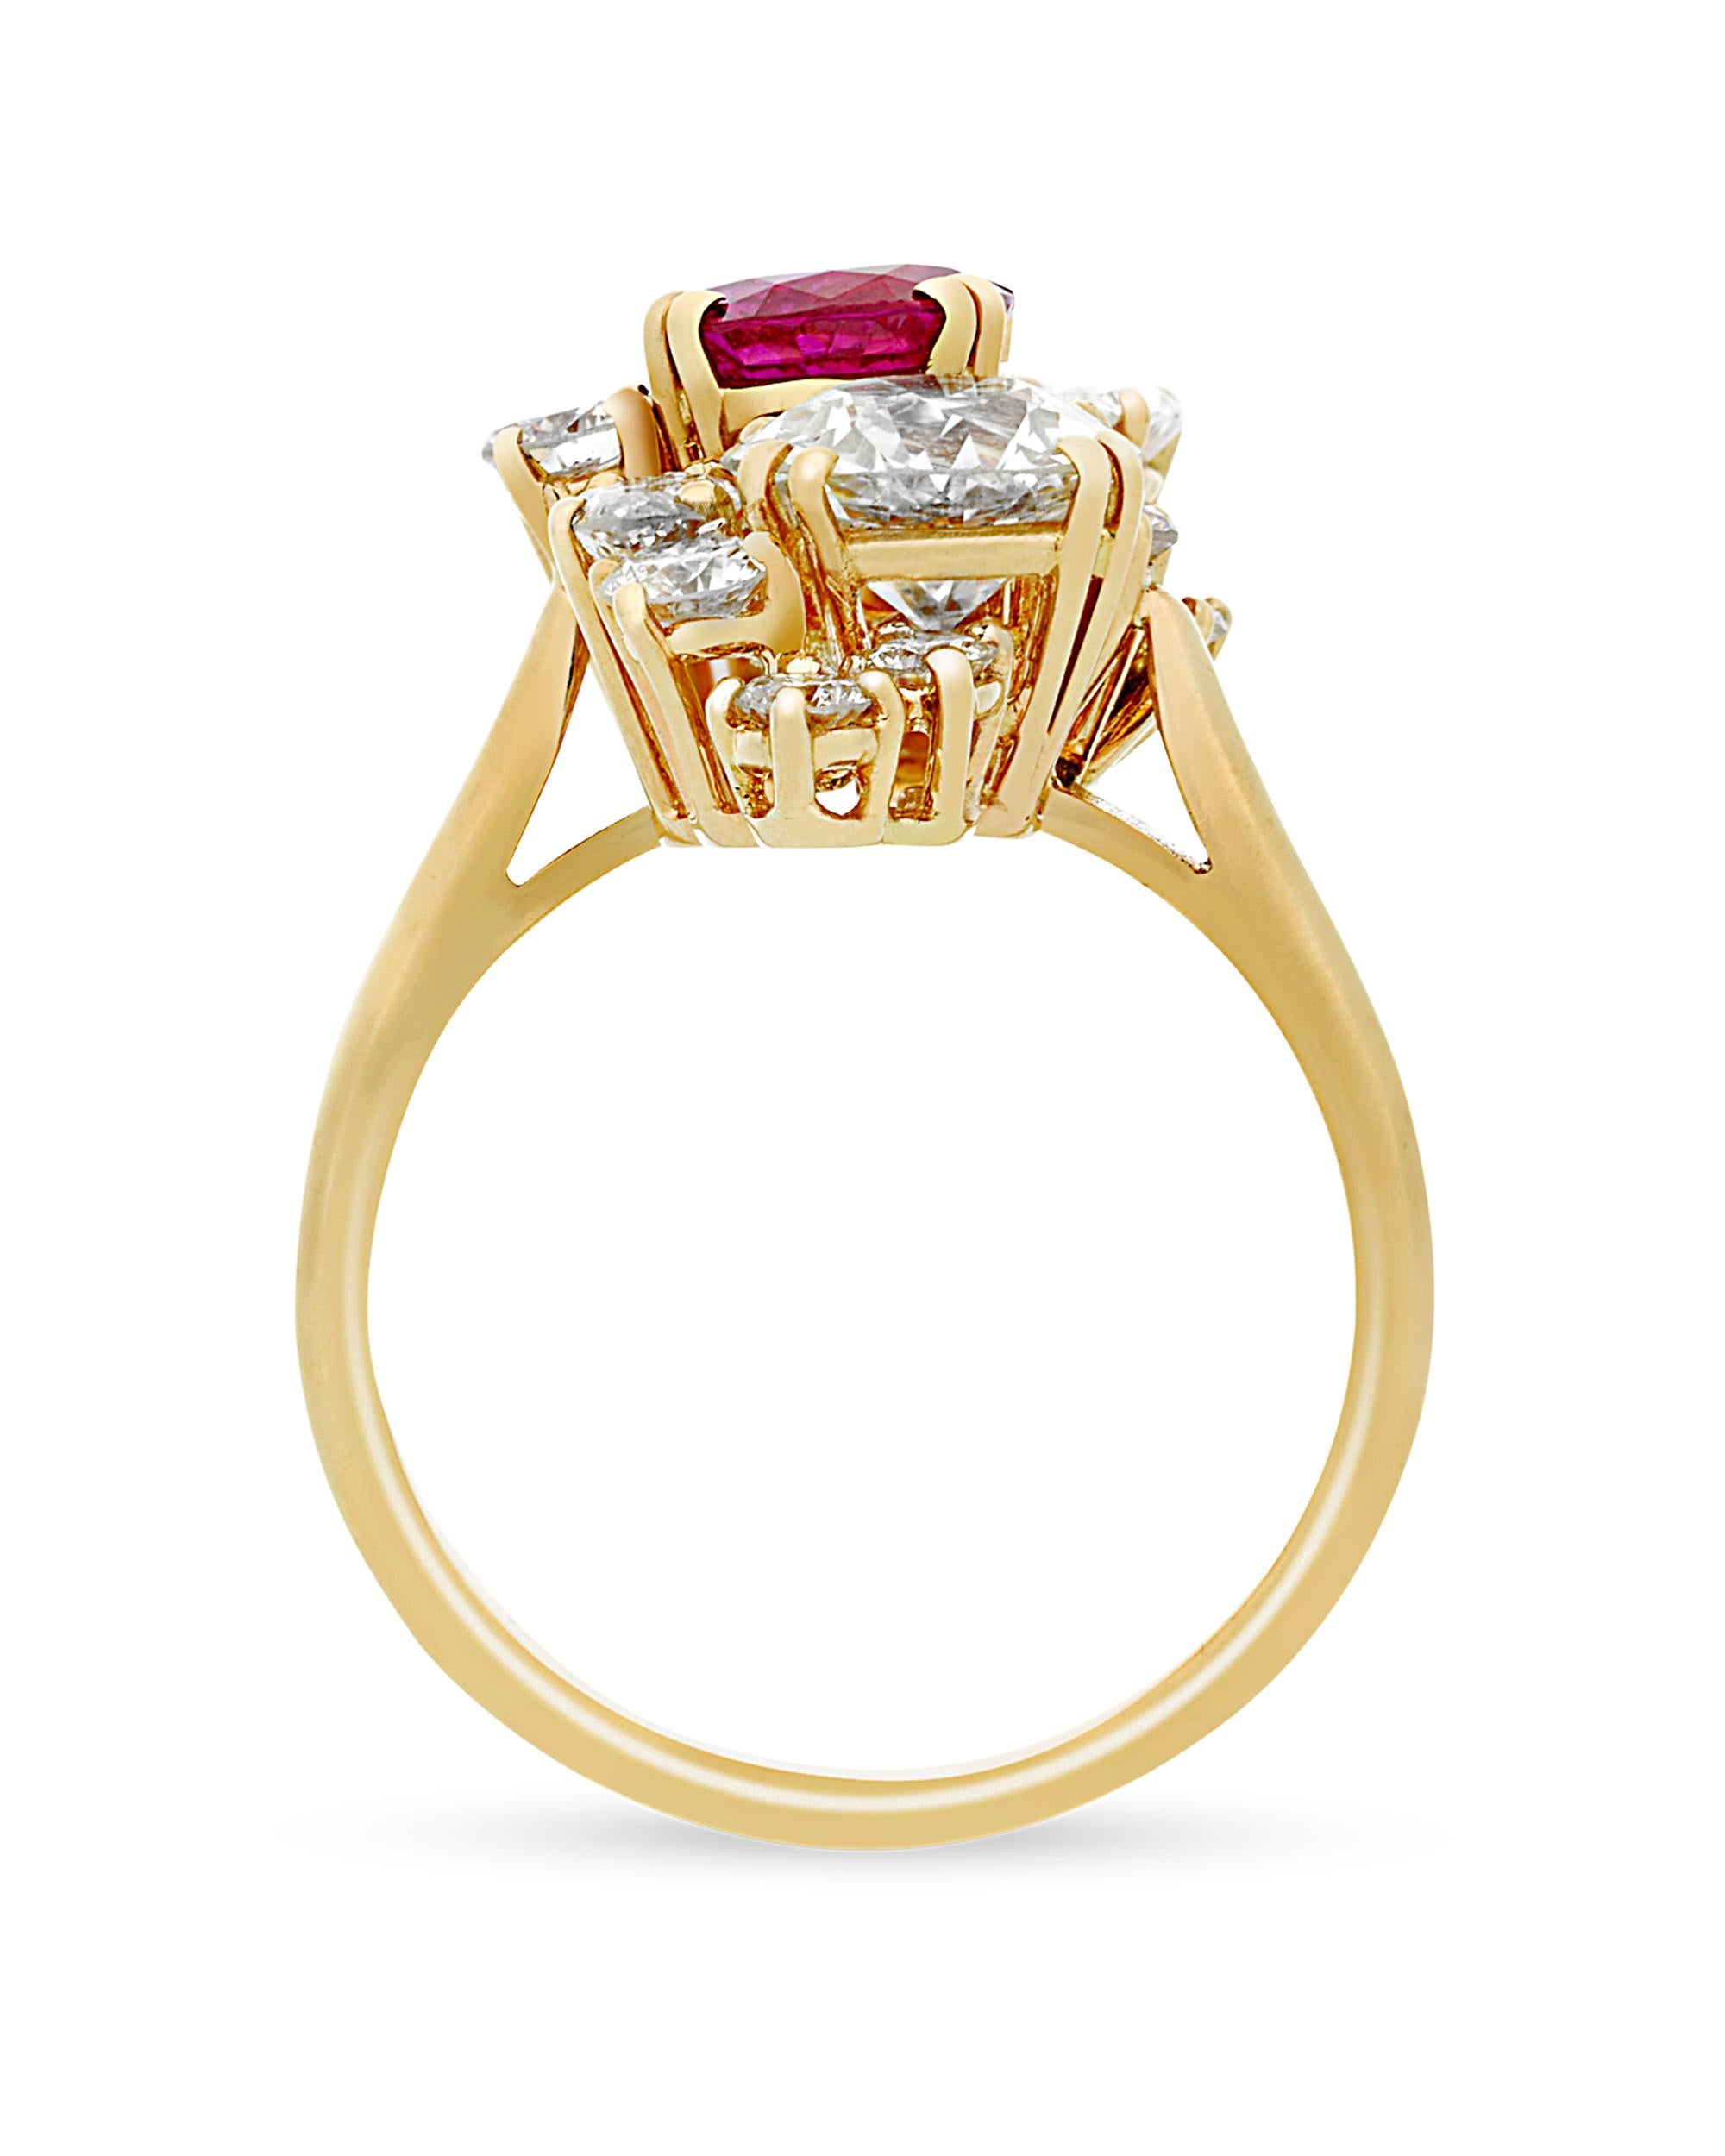 This remarkable Burma ruby ring by Boucheron is a beautiful jeweled creation by one of the most famous names in luxury. The approximately 0.89-carat oval ruby is certified by the American Gemological Laboratories as untreated and Burmese in origin,